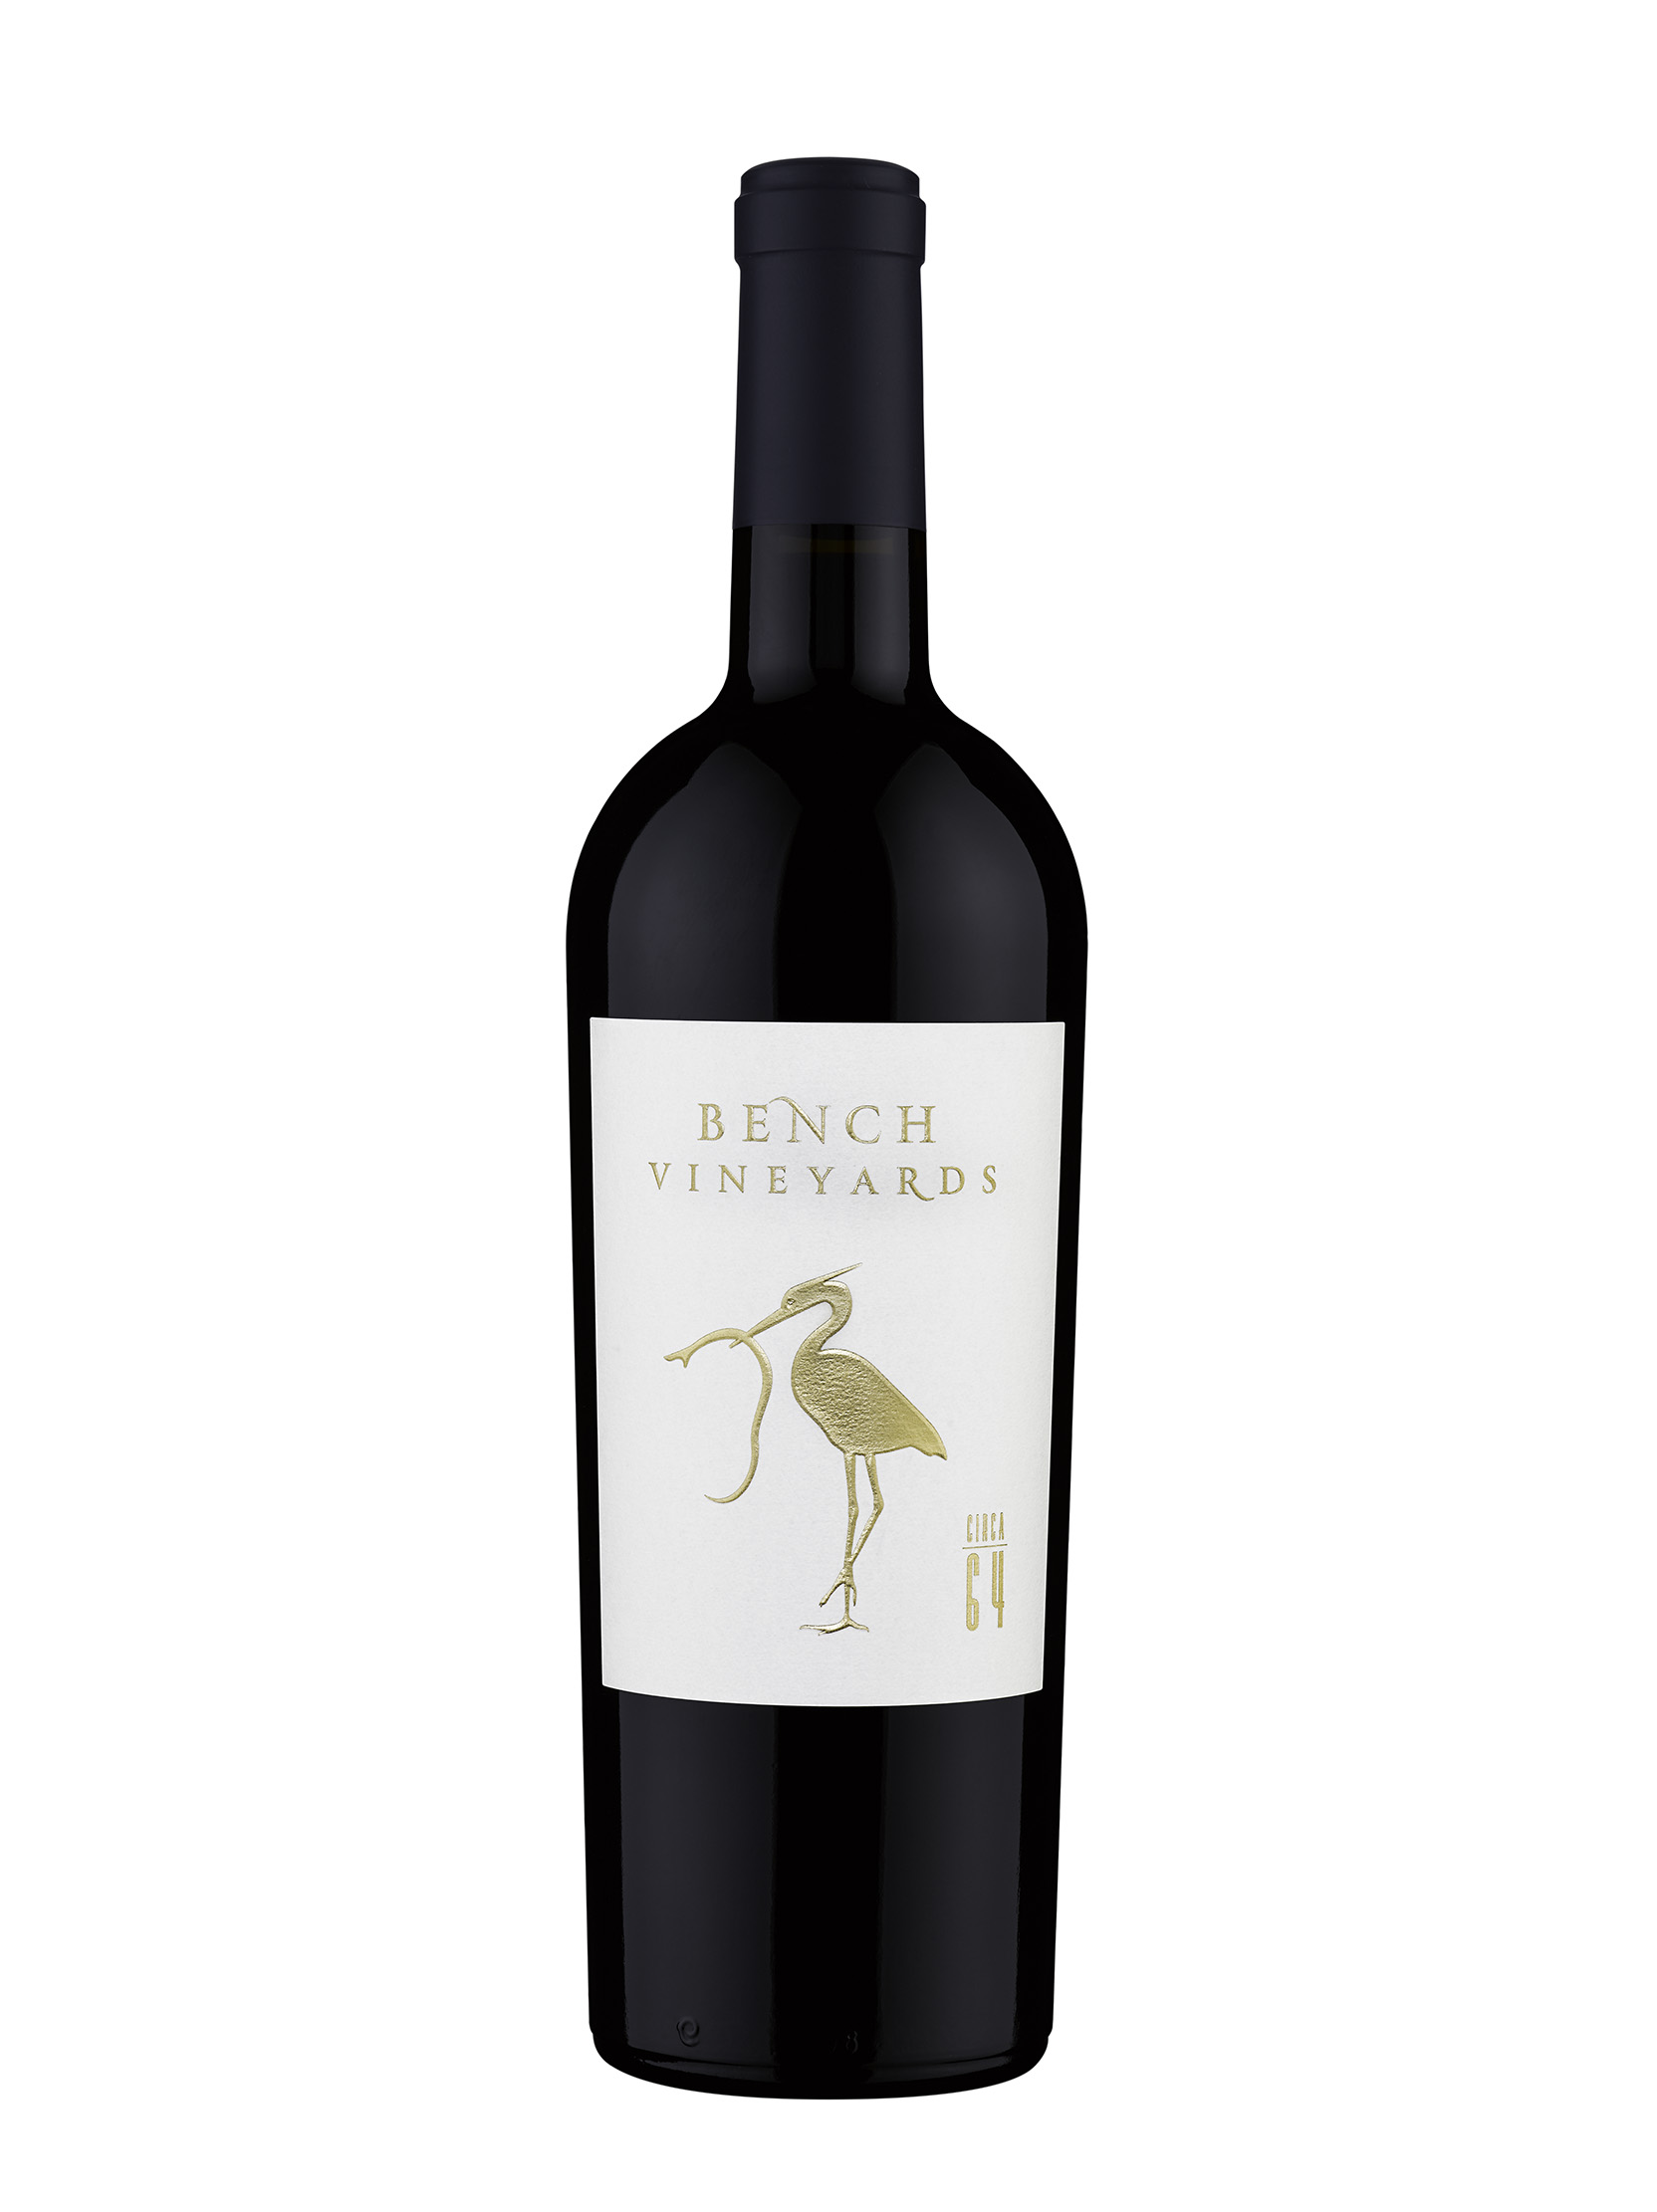 Product Image for 2016 Bench Vineyards "Circa 64" Red Wine, SLD